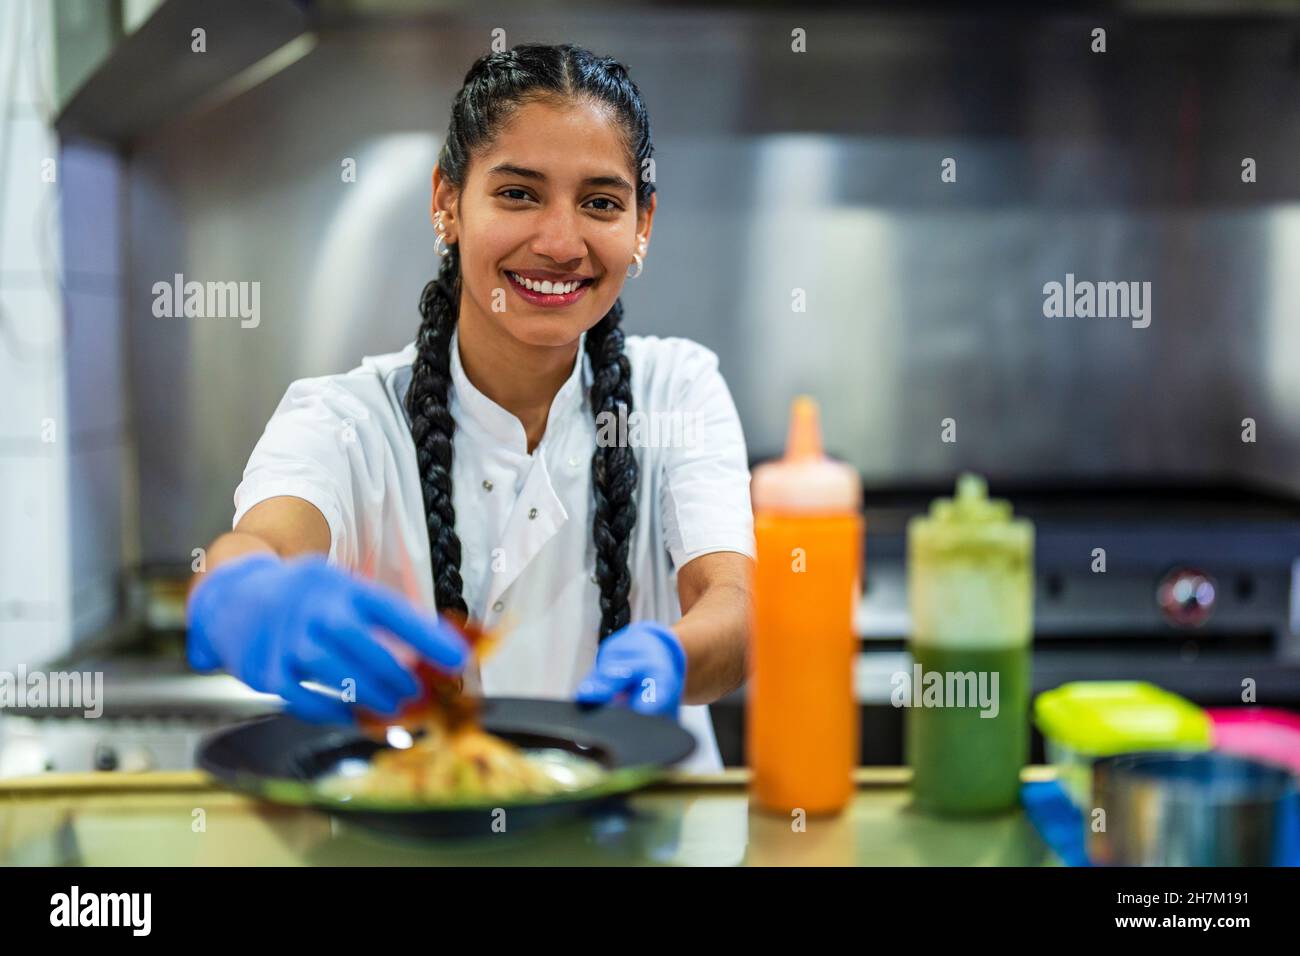 Smiling kitchen trainee food styling in restaurant Stock Photo